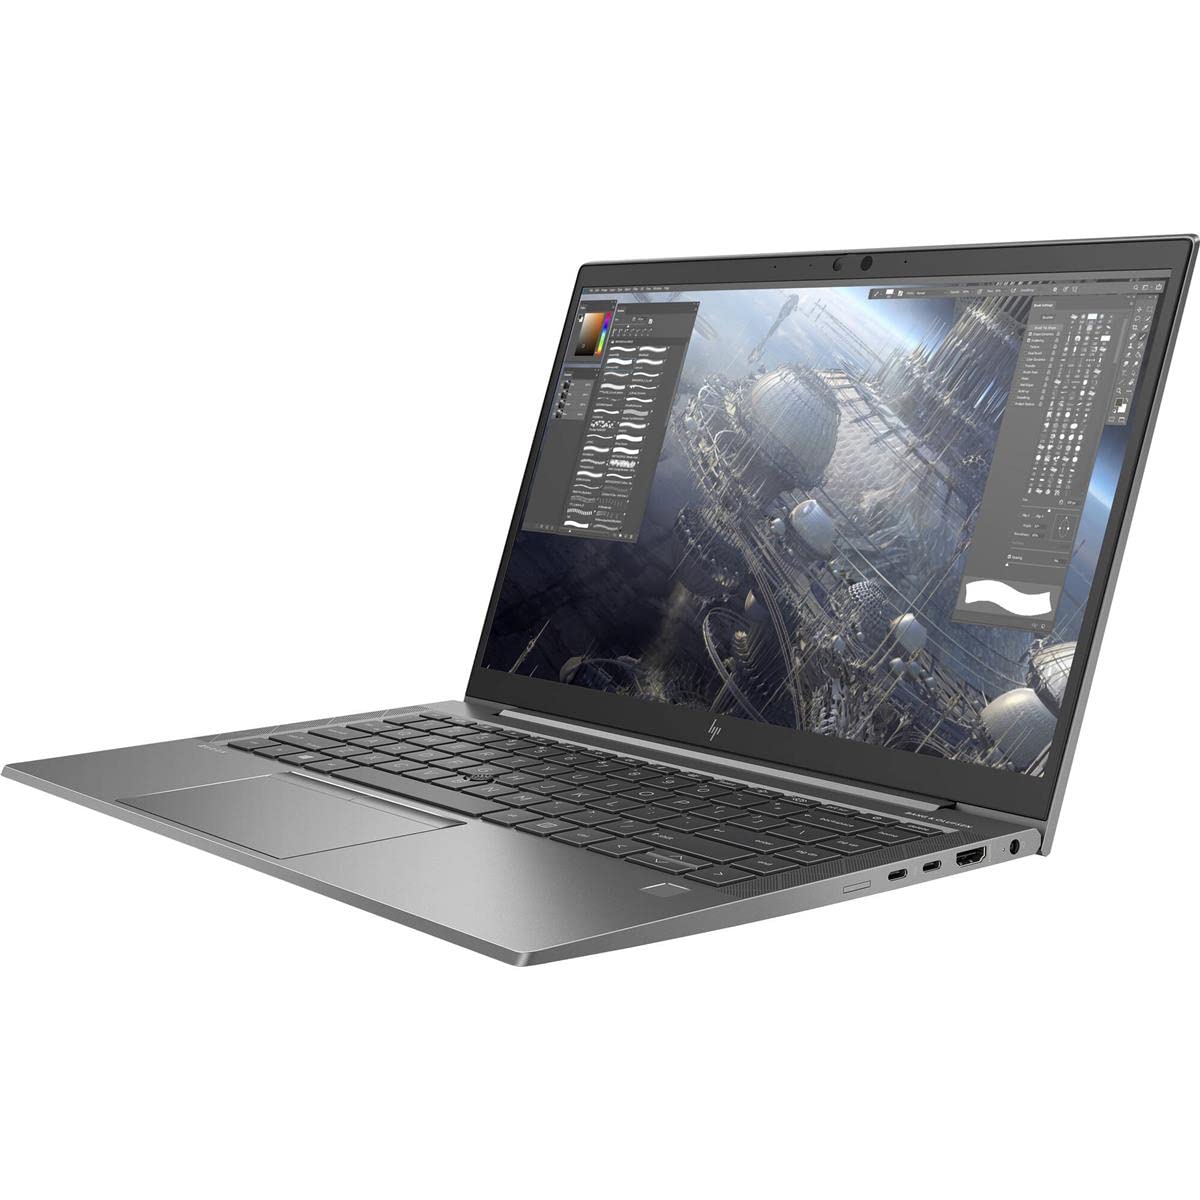 HP Smart Buy/Zbook/Firefly/14G8, INTELCOREI51135G7 (2.40GHZ, 8MB, 4CORES), 16GB32002D